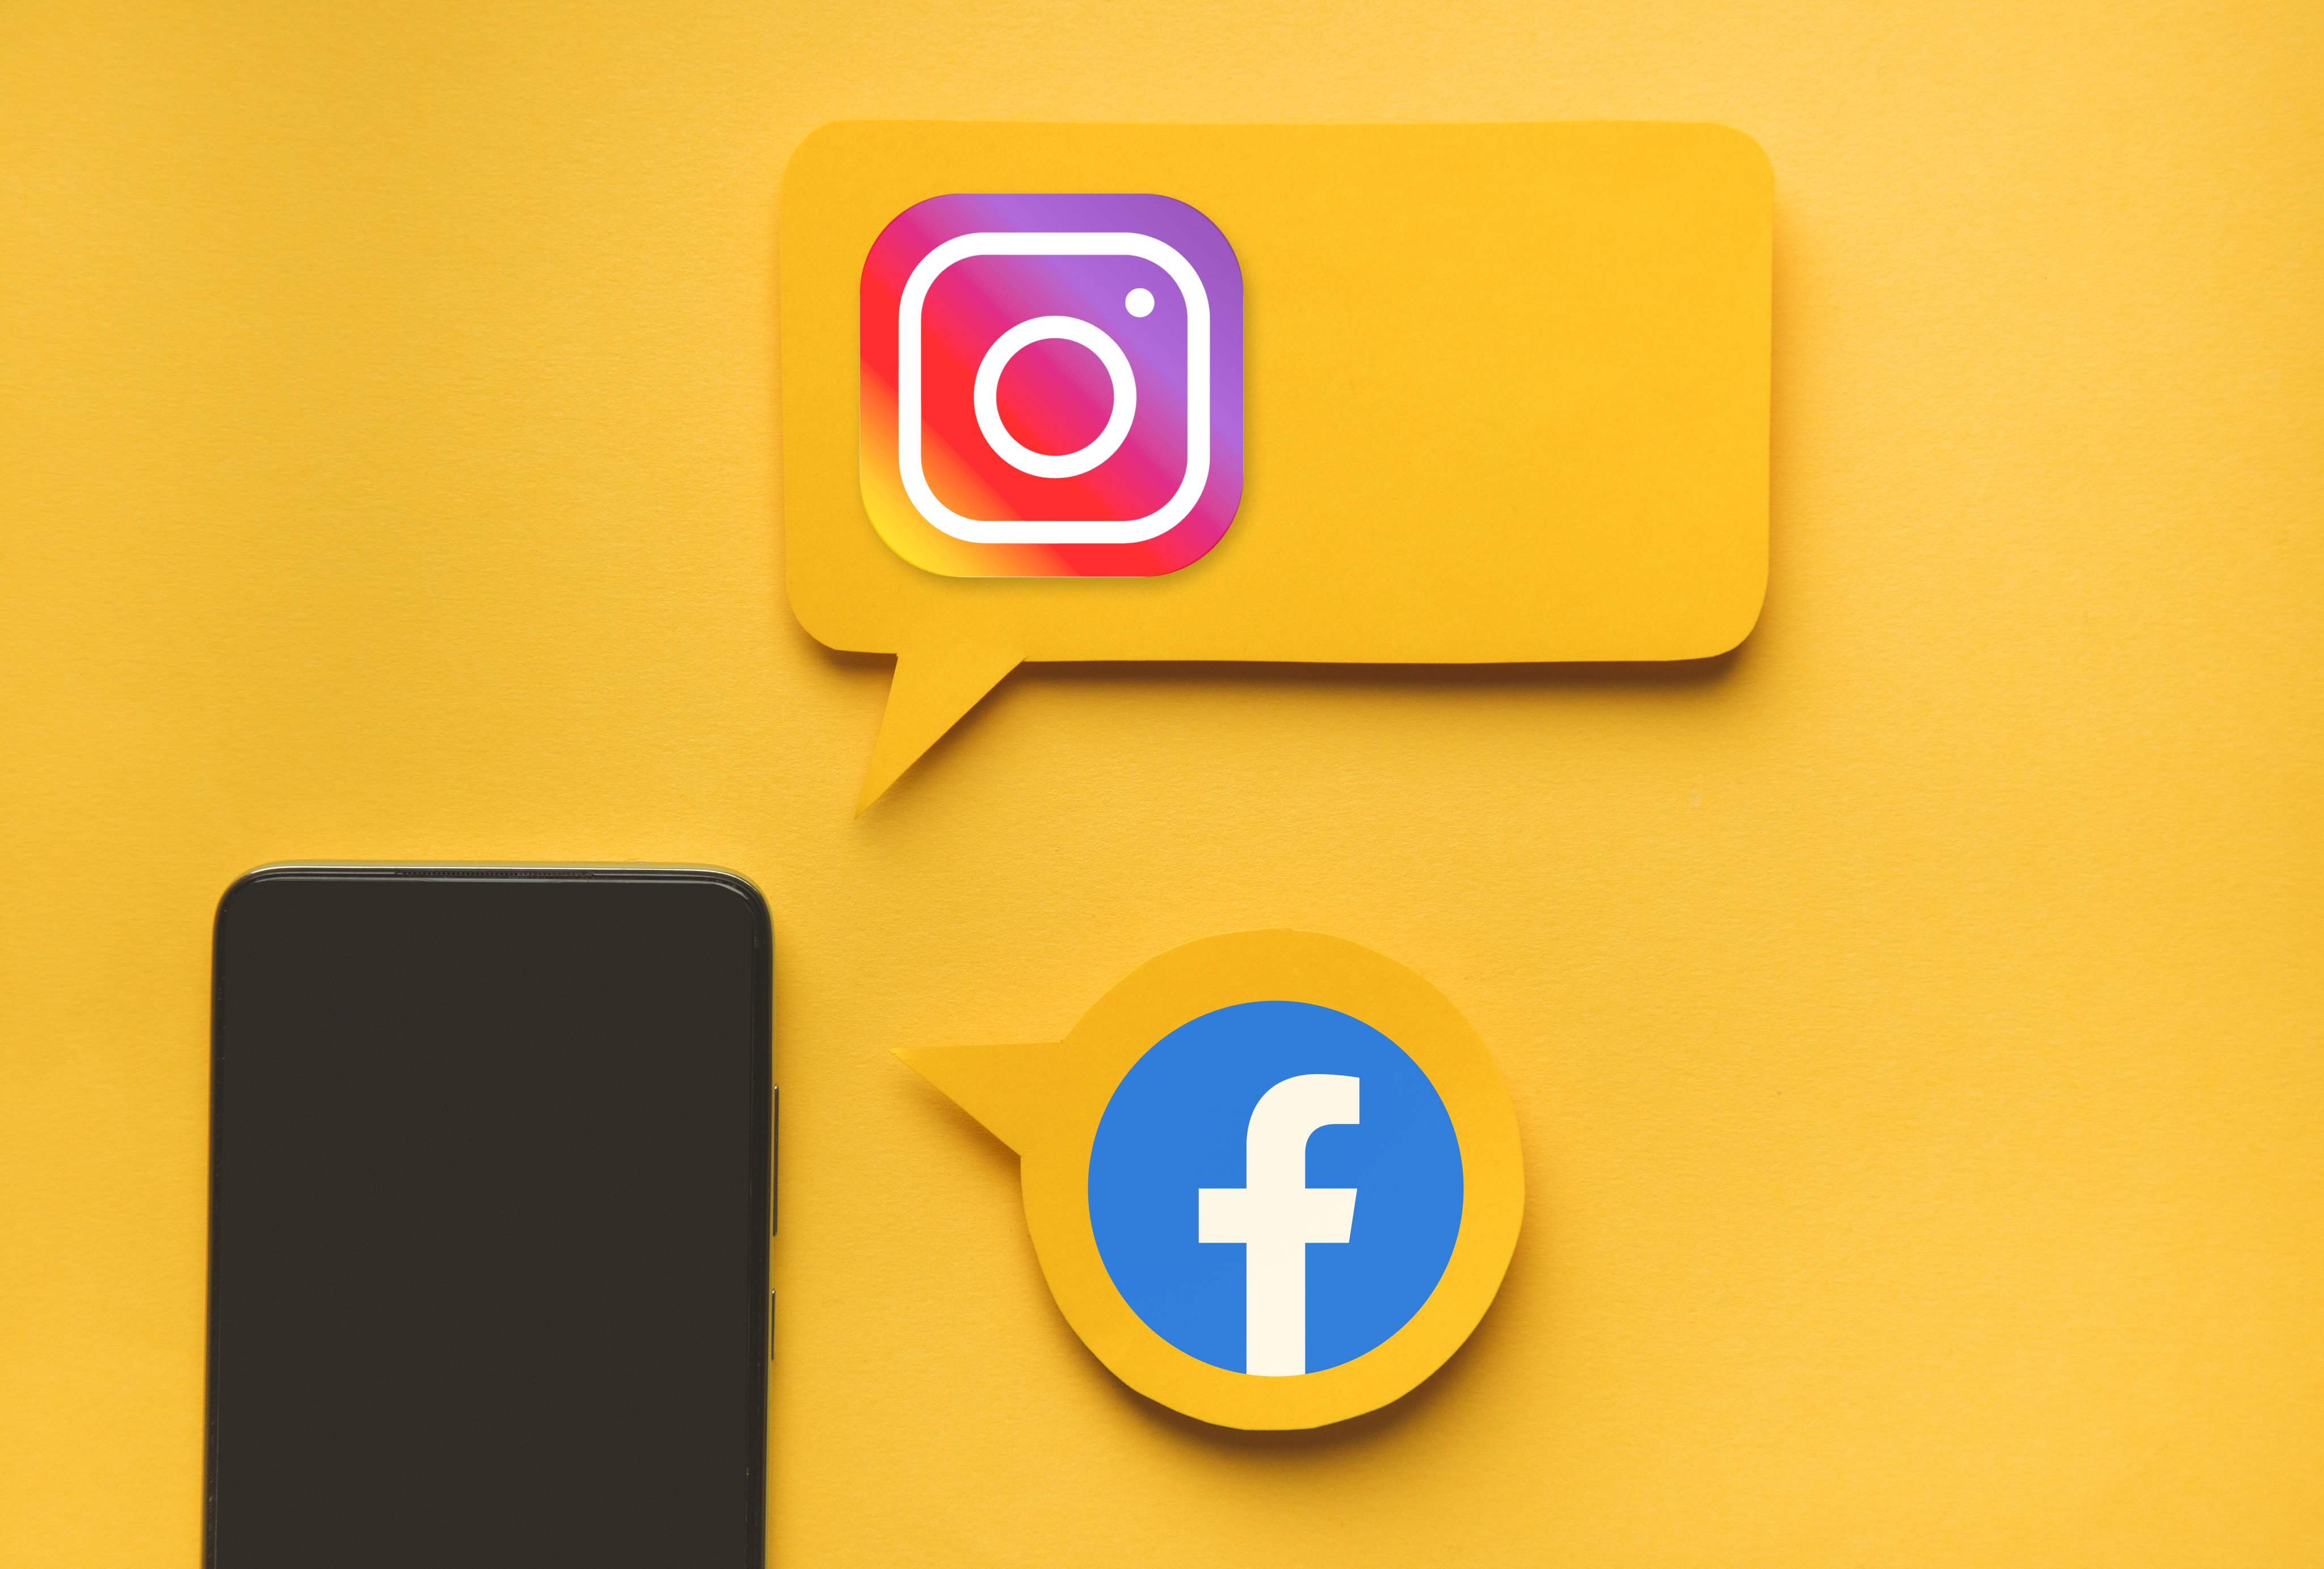 What are the Benefits of Advertising on Facebook and Instagram?